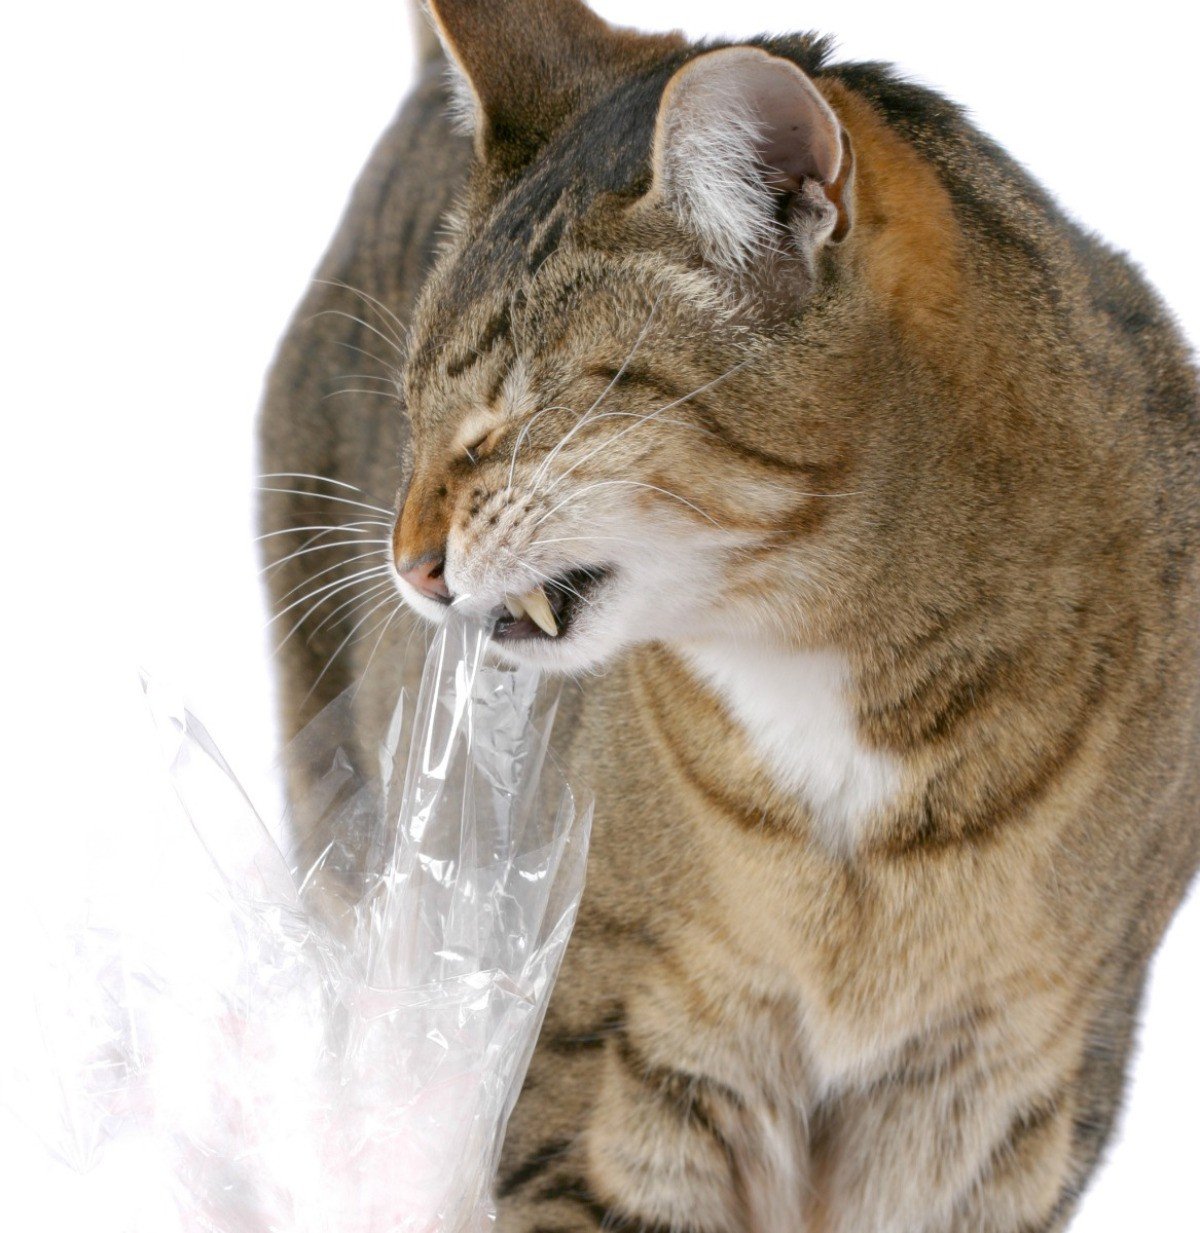 Why Do Cats Like Plastic Bags?